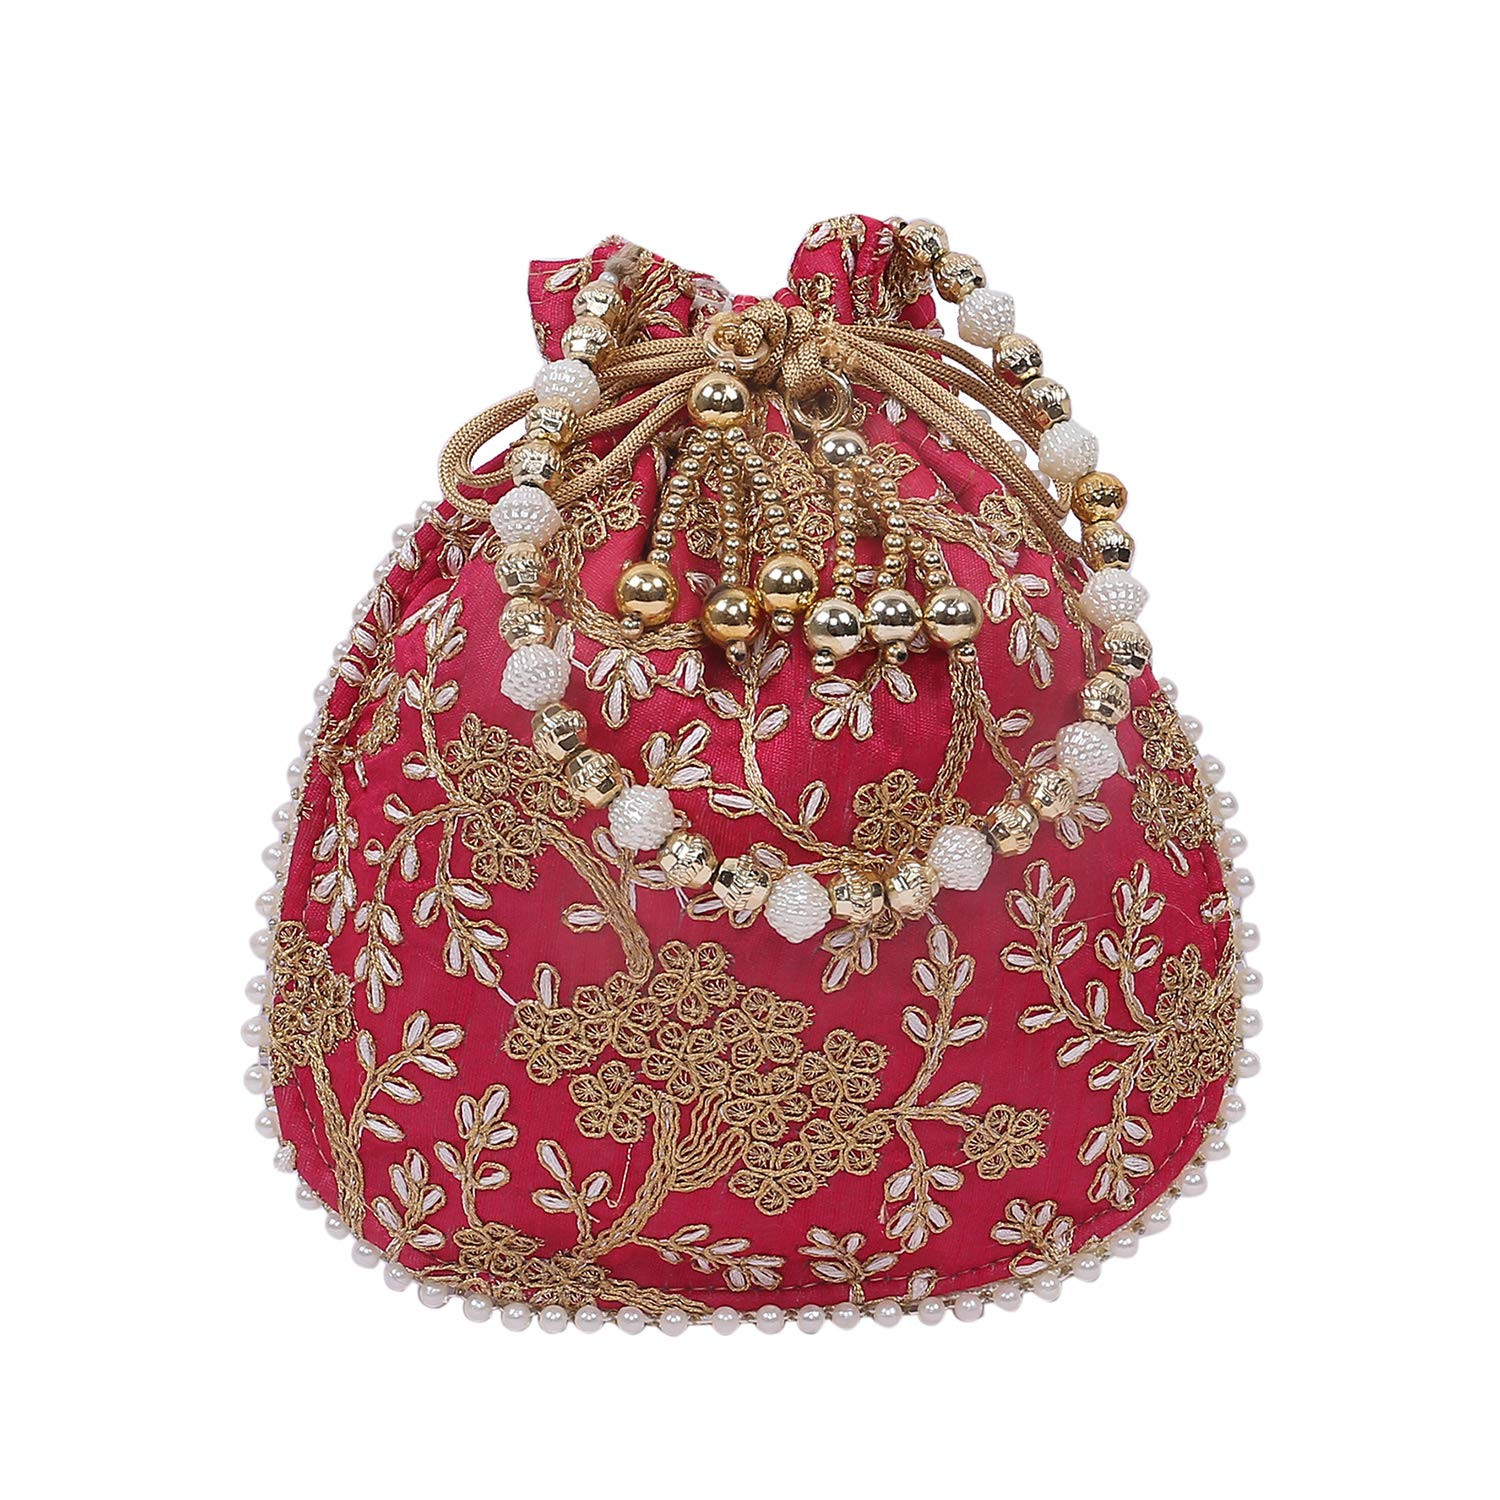 Kuber Industries Embroidery Drawstring Potli|Hand Purse With Gold Pearl Border & Handle For Woman,Girls Pack of 2 (Red & Maroon)